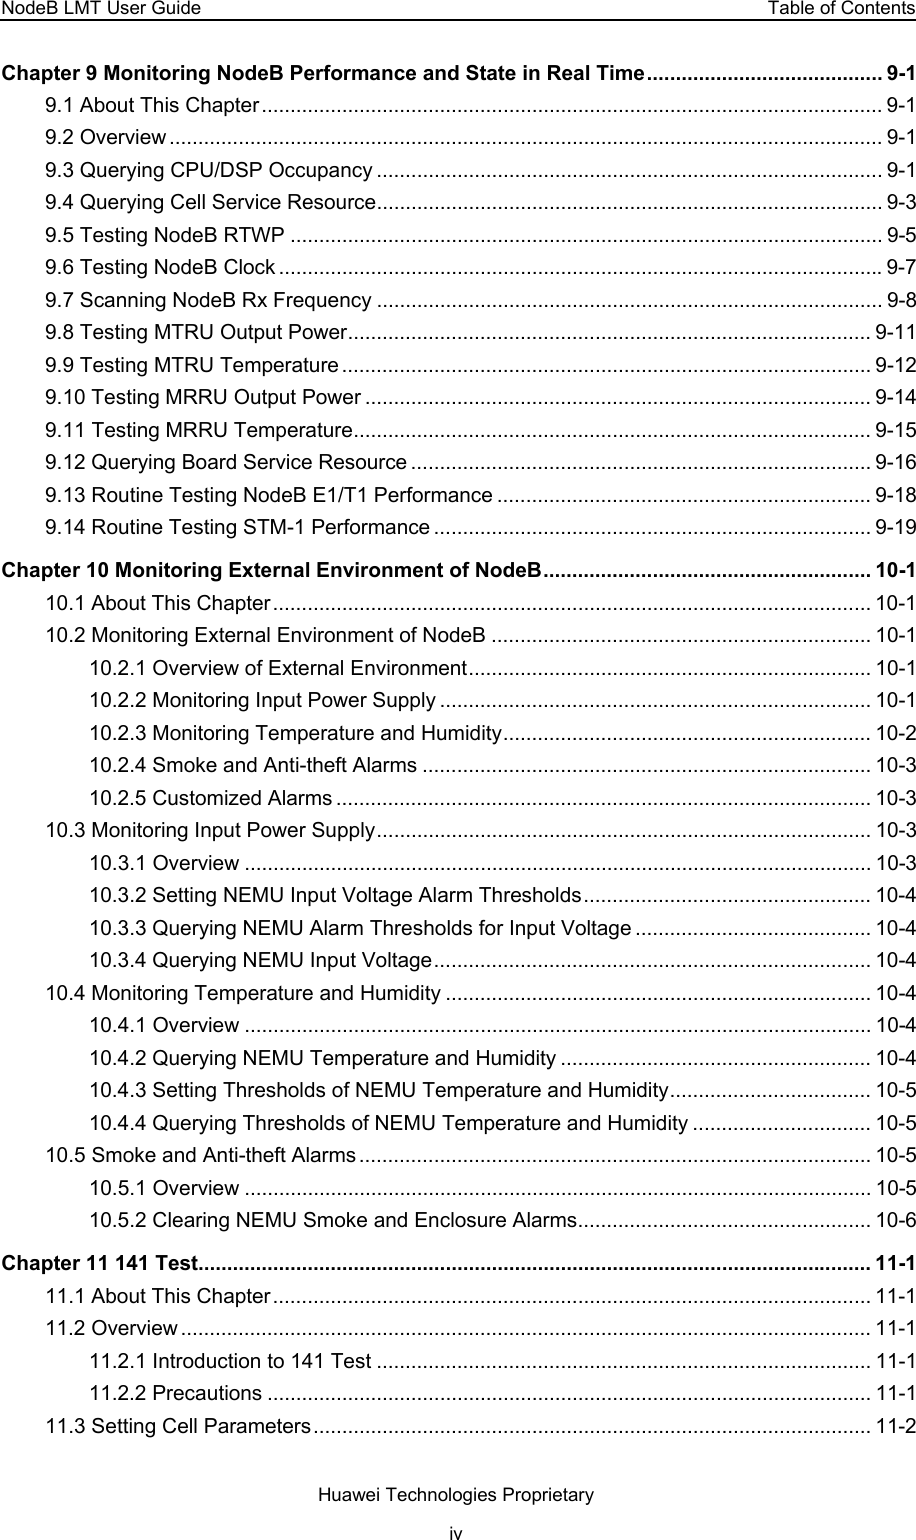 NodeB LMT User Guide  Table of Contents Chapter 9 Monitoring NodeB Performance and State in Real Time......................................... 9-1 9.1 About This Chapter............................................................................................................ 9-1 9.2 Overview ............................................................................................................................ 9-1 9.3 Querying CPU/DSP Occupancy ........................................................................................ 9-1 9.4 Querying Cell Service Resource........................................................................................ 9-3 9.5 Testing NodeB RTWP ....................................................................................................... 9-5 9.6 Testing NodeB Clock .........................................................................................................9-7 9.7 Scanning NodeB Rx Frequency ........................................................................................ 9-8 9.8 Testing MTRU Output Power........................................................................................... 9-11 9.9 Testing MTRU Temperature ............................................................................................ 9-12 9.10 Testing MRRU Output Power ........................................................................................ 9-14 9.11 Testing MRRU Temperature.......................................................................................... 9-15 9.12 Querying Board Service Resource ................................................................................ 9-16 9.13 Routine Testing NodeB E1/T1 Performance ................................................................. 9-18 9.14 Routine Testing STM-1 Performance ............................................................................ 9-19 Chapter 10 Monitoring External Environment of NodeB......................................................... 10-1 10.1 About This Chapter........................................................................................................ 10-1 10.2 Monitoring External Environment of NodeB .................................................................. 10-1 10.2.1 Overview of External Environment...................................................................... 10-1 10.2.2 Monitoring Input Power Supply ........................................................................... 10-1 10.2.3 Monitoring Temperature and Humidity................................................................ 10-2 10.2.4 Smoke and Anti-theft Alarms .............................................................................. 10-3 10.2.5 Customized Alarms ............................................................................................. 10-3 10.3 Monitoring Input Power Supply...................................................................................... 10-3 10.3.1 Overview ............................................................................................................. 10-3 10.3.2 Setting NEMU Input Voltage Alarm Thresholds.................................................. 10-4 10.3.3 Querying NEMU Alarm Thresholds for Input Voltage ......................................... 10-4 10.3.4 Querying NEMU Input Voltage............................................................................ 10-4 10.4 Monitoring Temperature and Humidity .......................................................................... 10-4 10.4.1 Overview ............................................................................................................. 10-4 10.4.2 Querying NEMU Temperature and Humidity ...................................................... 10-4 10.4.3 Setting Thresholds of NEMU Temperature and Humidity................................... 10-5 10.4.4 Querying Thresholds of NEMU Temperature and Humidity ............................... 10-5 10.5 Smoke and Anti-theft Alarms......................................................................................... 10-5 10.5.1 Overview ............................................................................................................. 10-5 10.5.2 Clearing NEMU Smoke and Enclosure Alarms................................................... 10-6 Chapter 11 141 Test..................................................................................................................... 11-1 11.1 About This Chapter........................................................................................................ 11-1 11.2 Overview ........................................................................................................................ 11-1 11.2.1 Introduction to 141 Test ...................................................................................... 11-1 11.2.2 Precautions ......................................................................................................... 11-1 11.3 Setting Cell Parameters................................................................................................. 11-2 Huawei Technologies Proprietary iv 